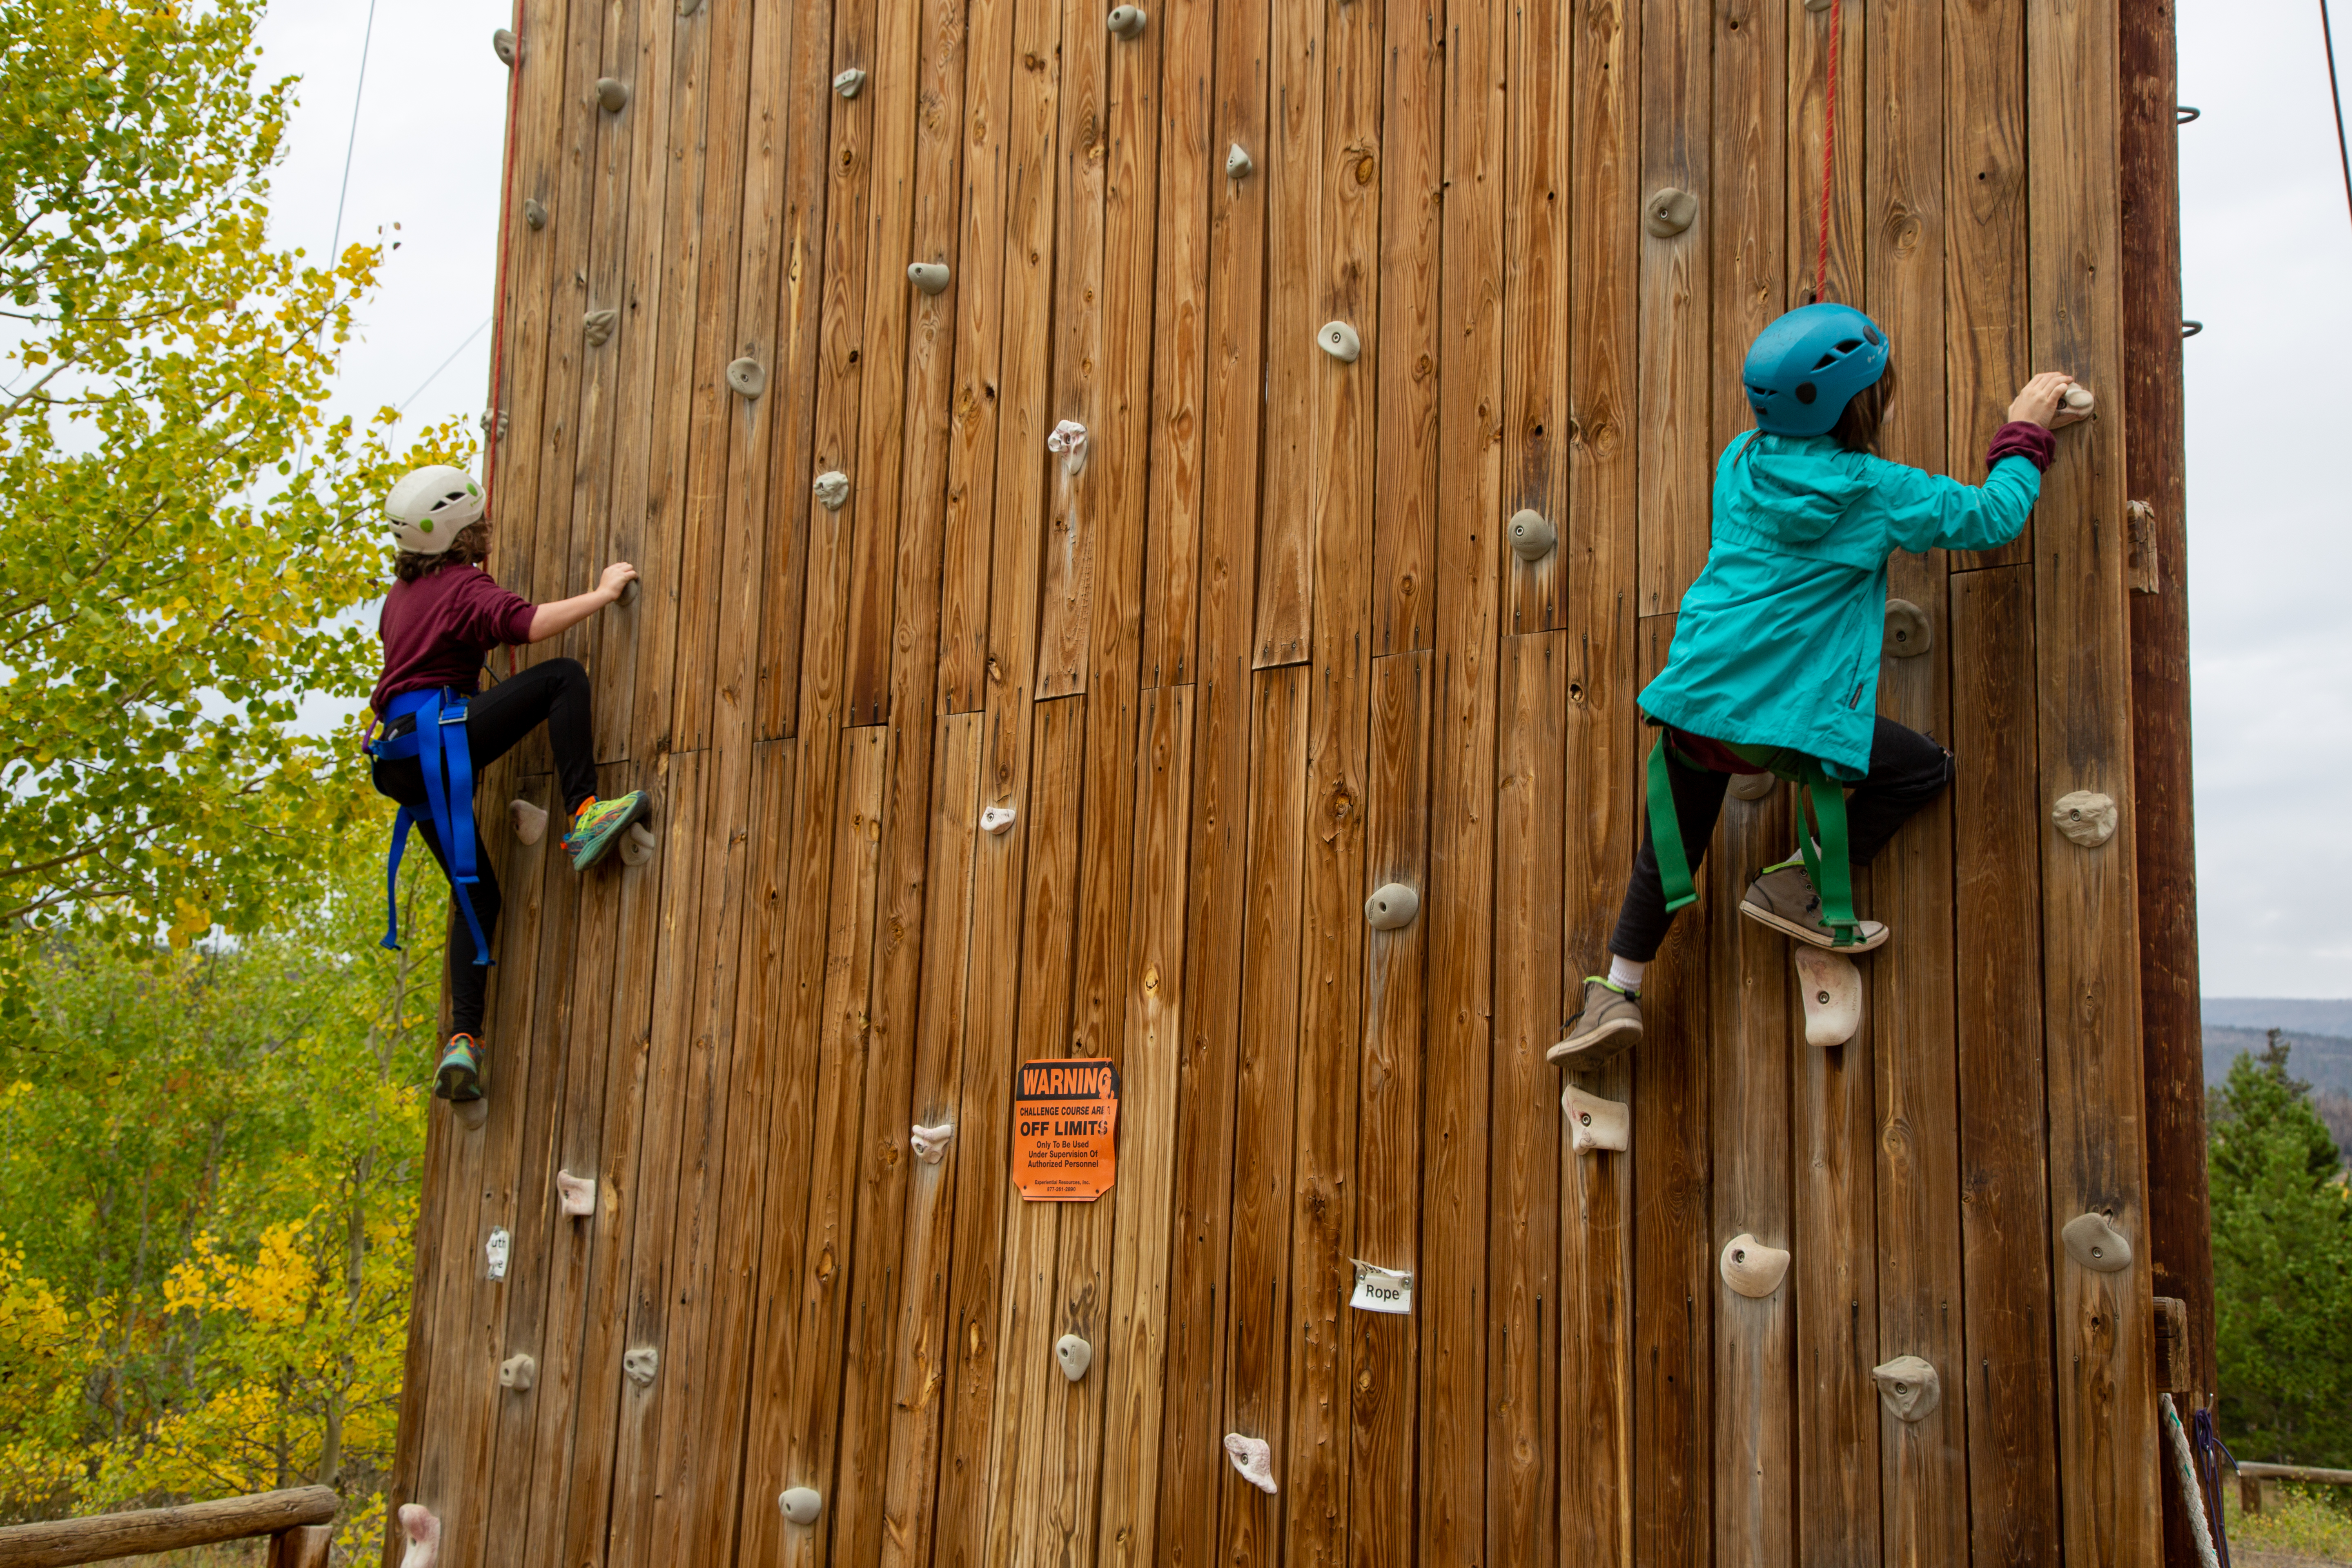 Students on the climbing wall during Eco Week 2022.